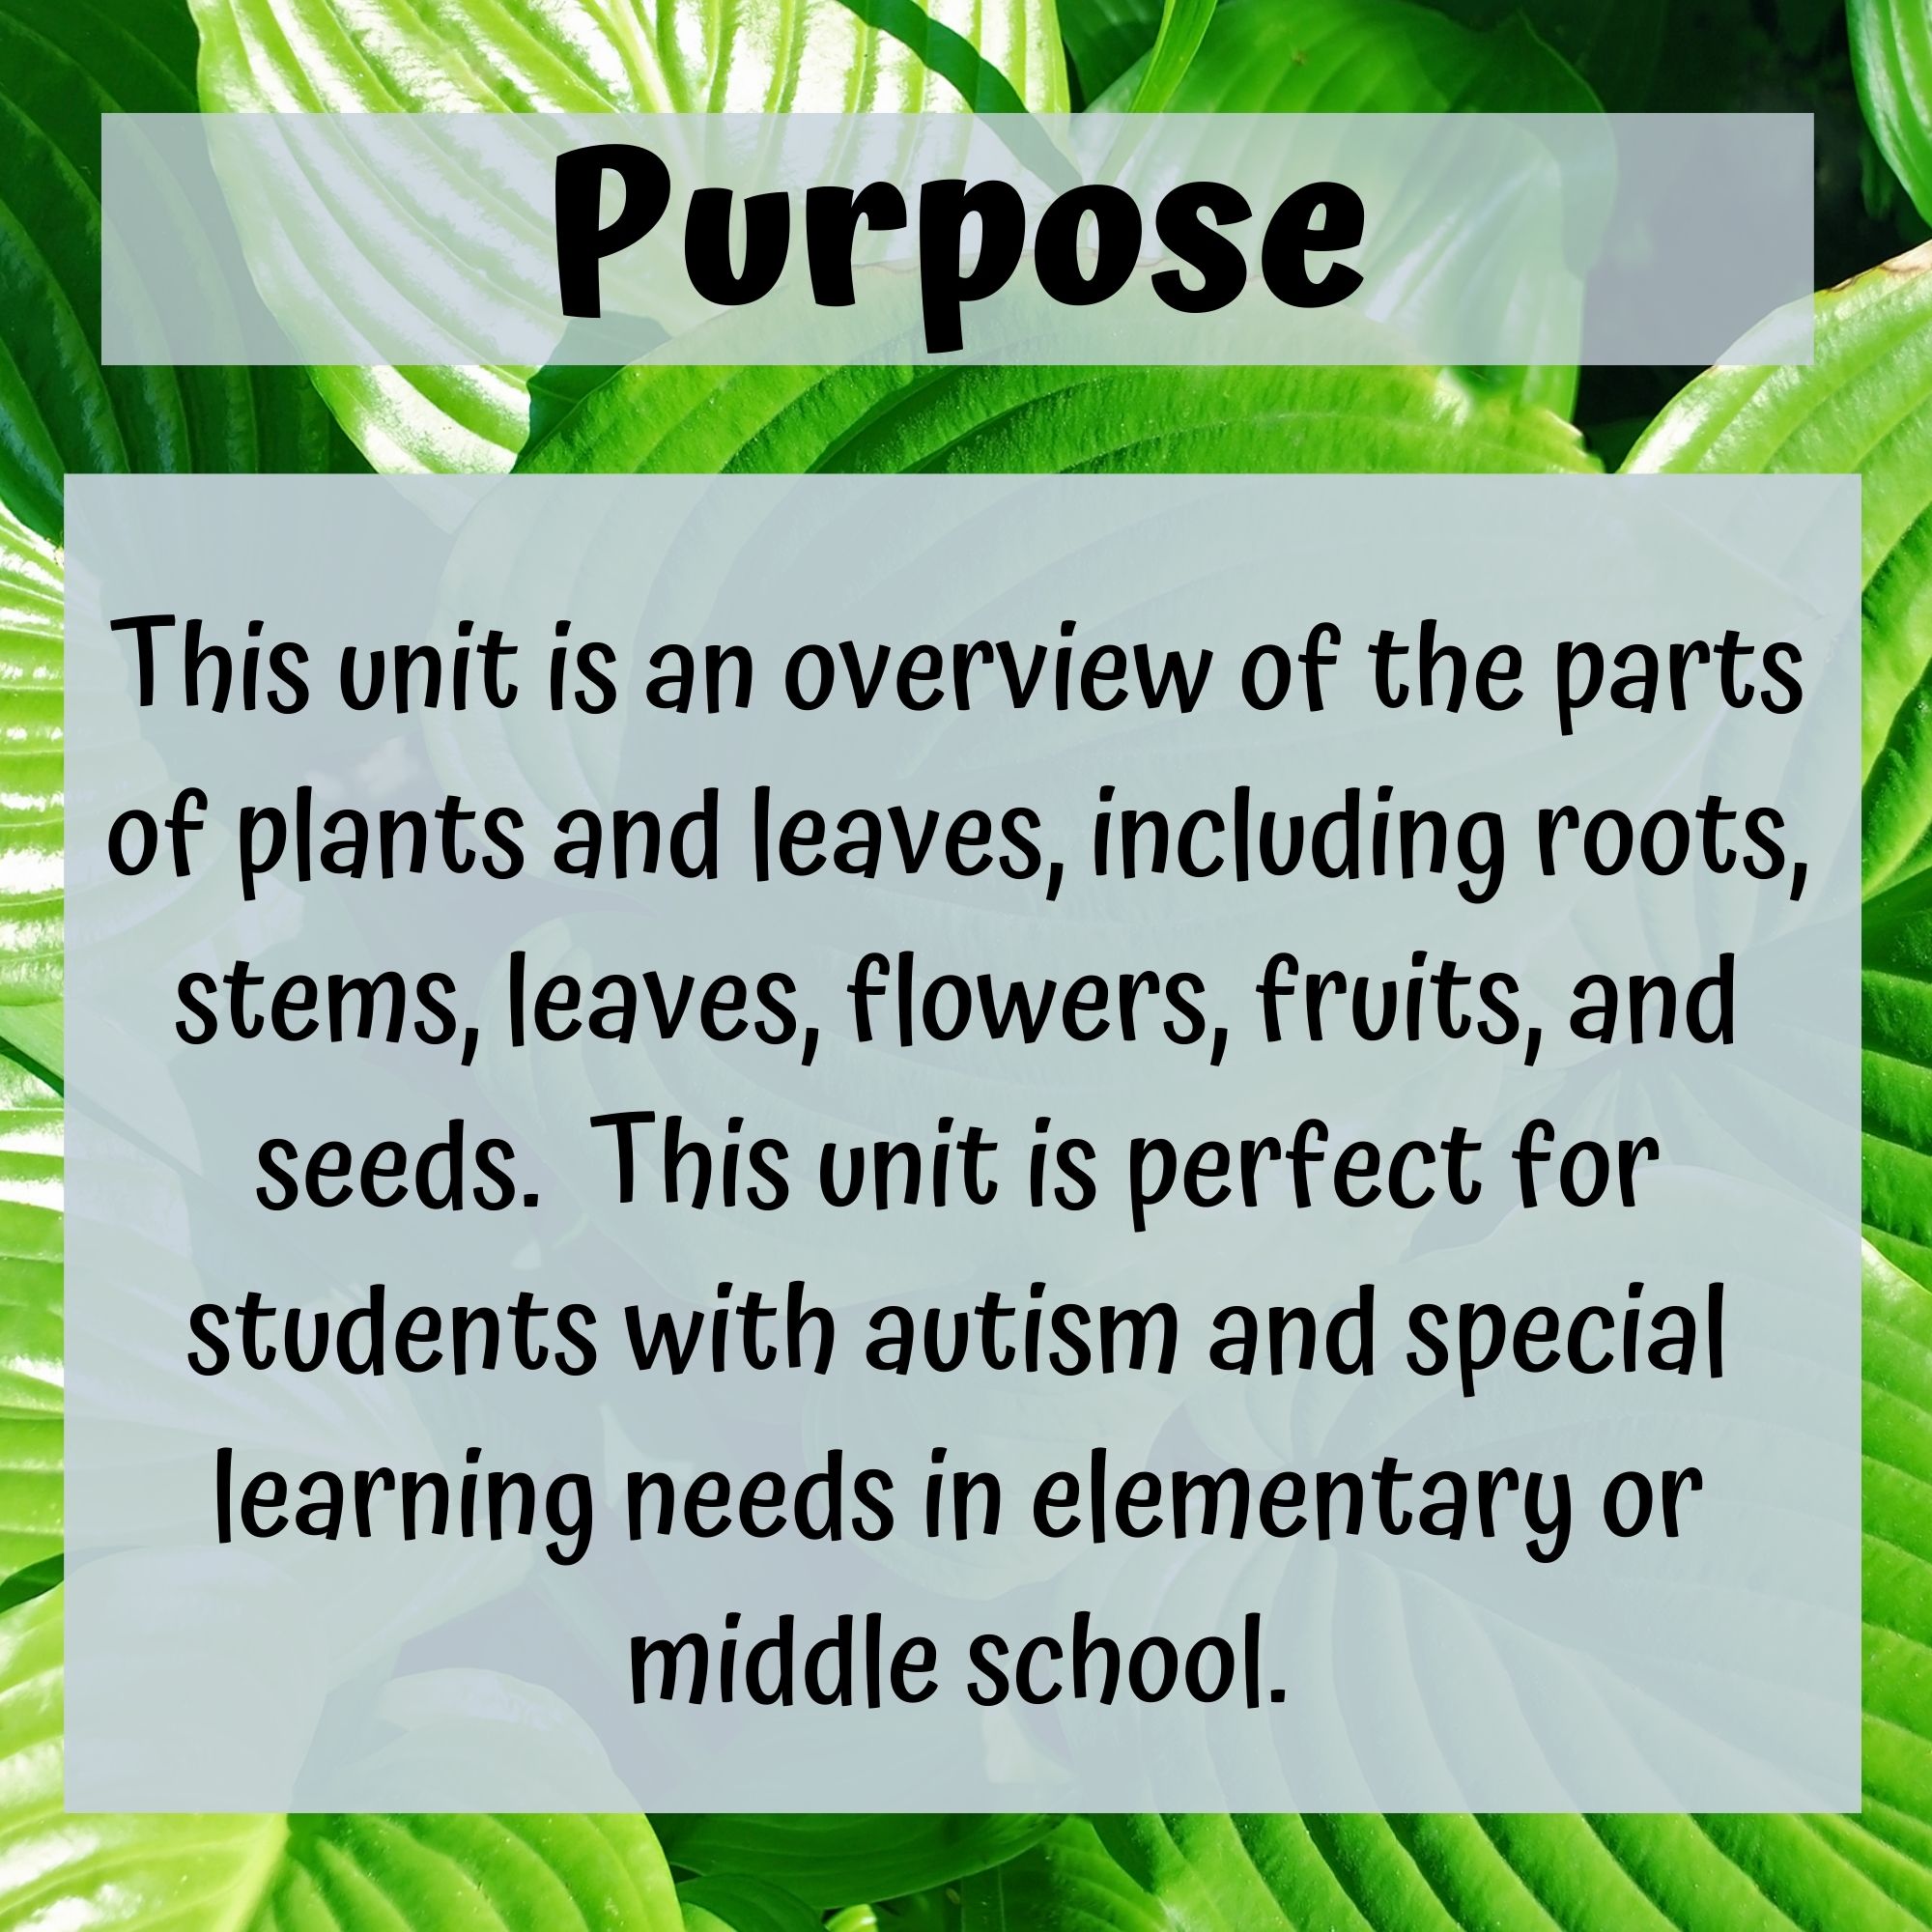 Parts of Plants for Special Education